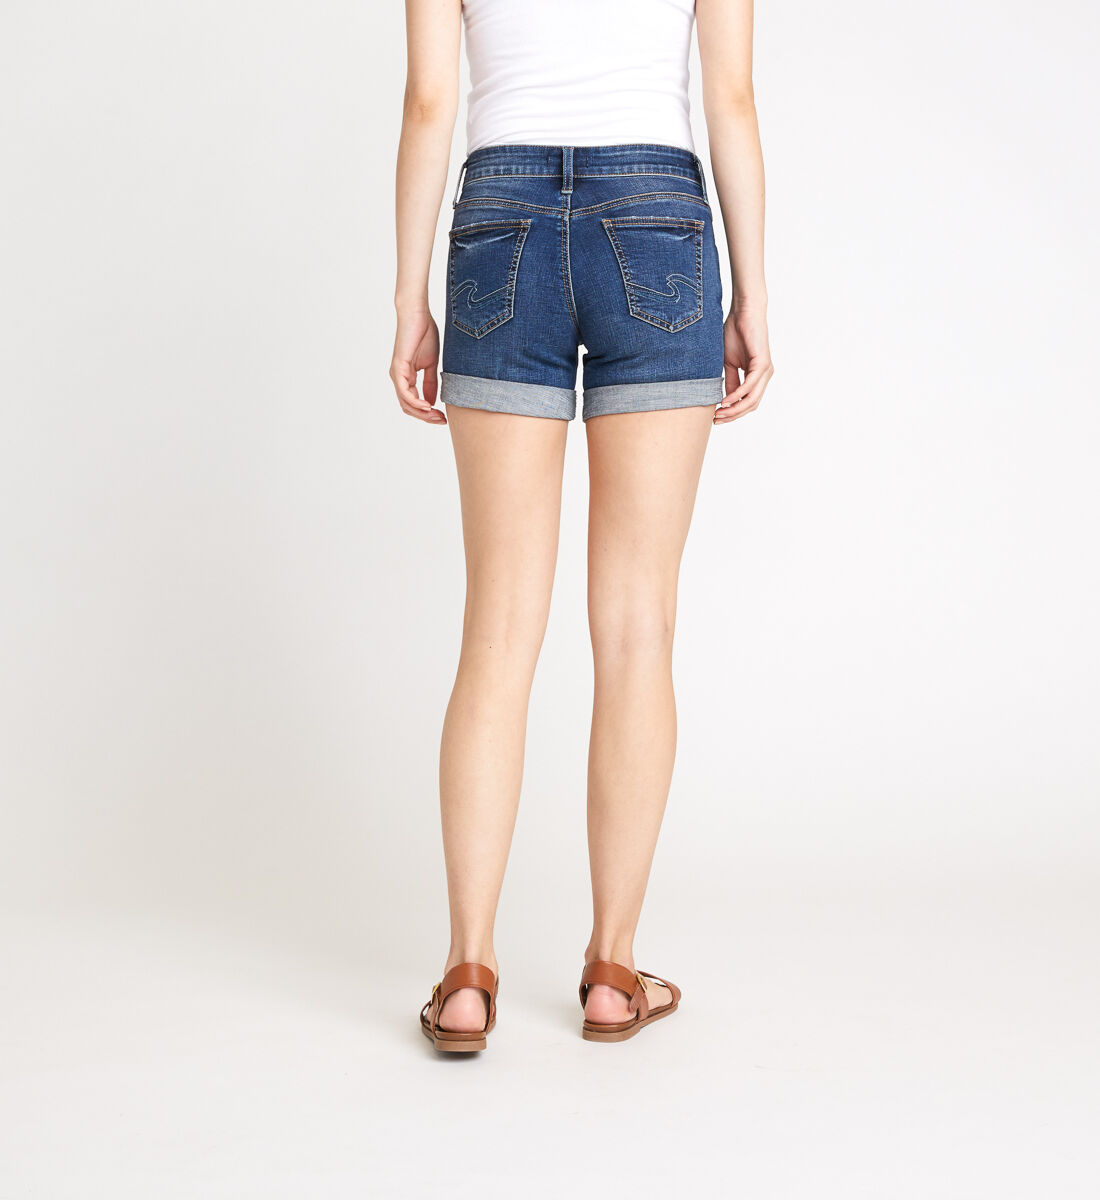 silver jeans co shorts